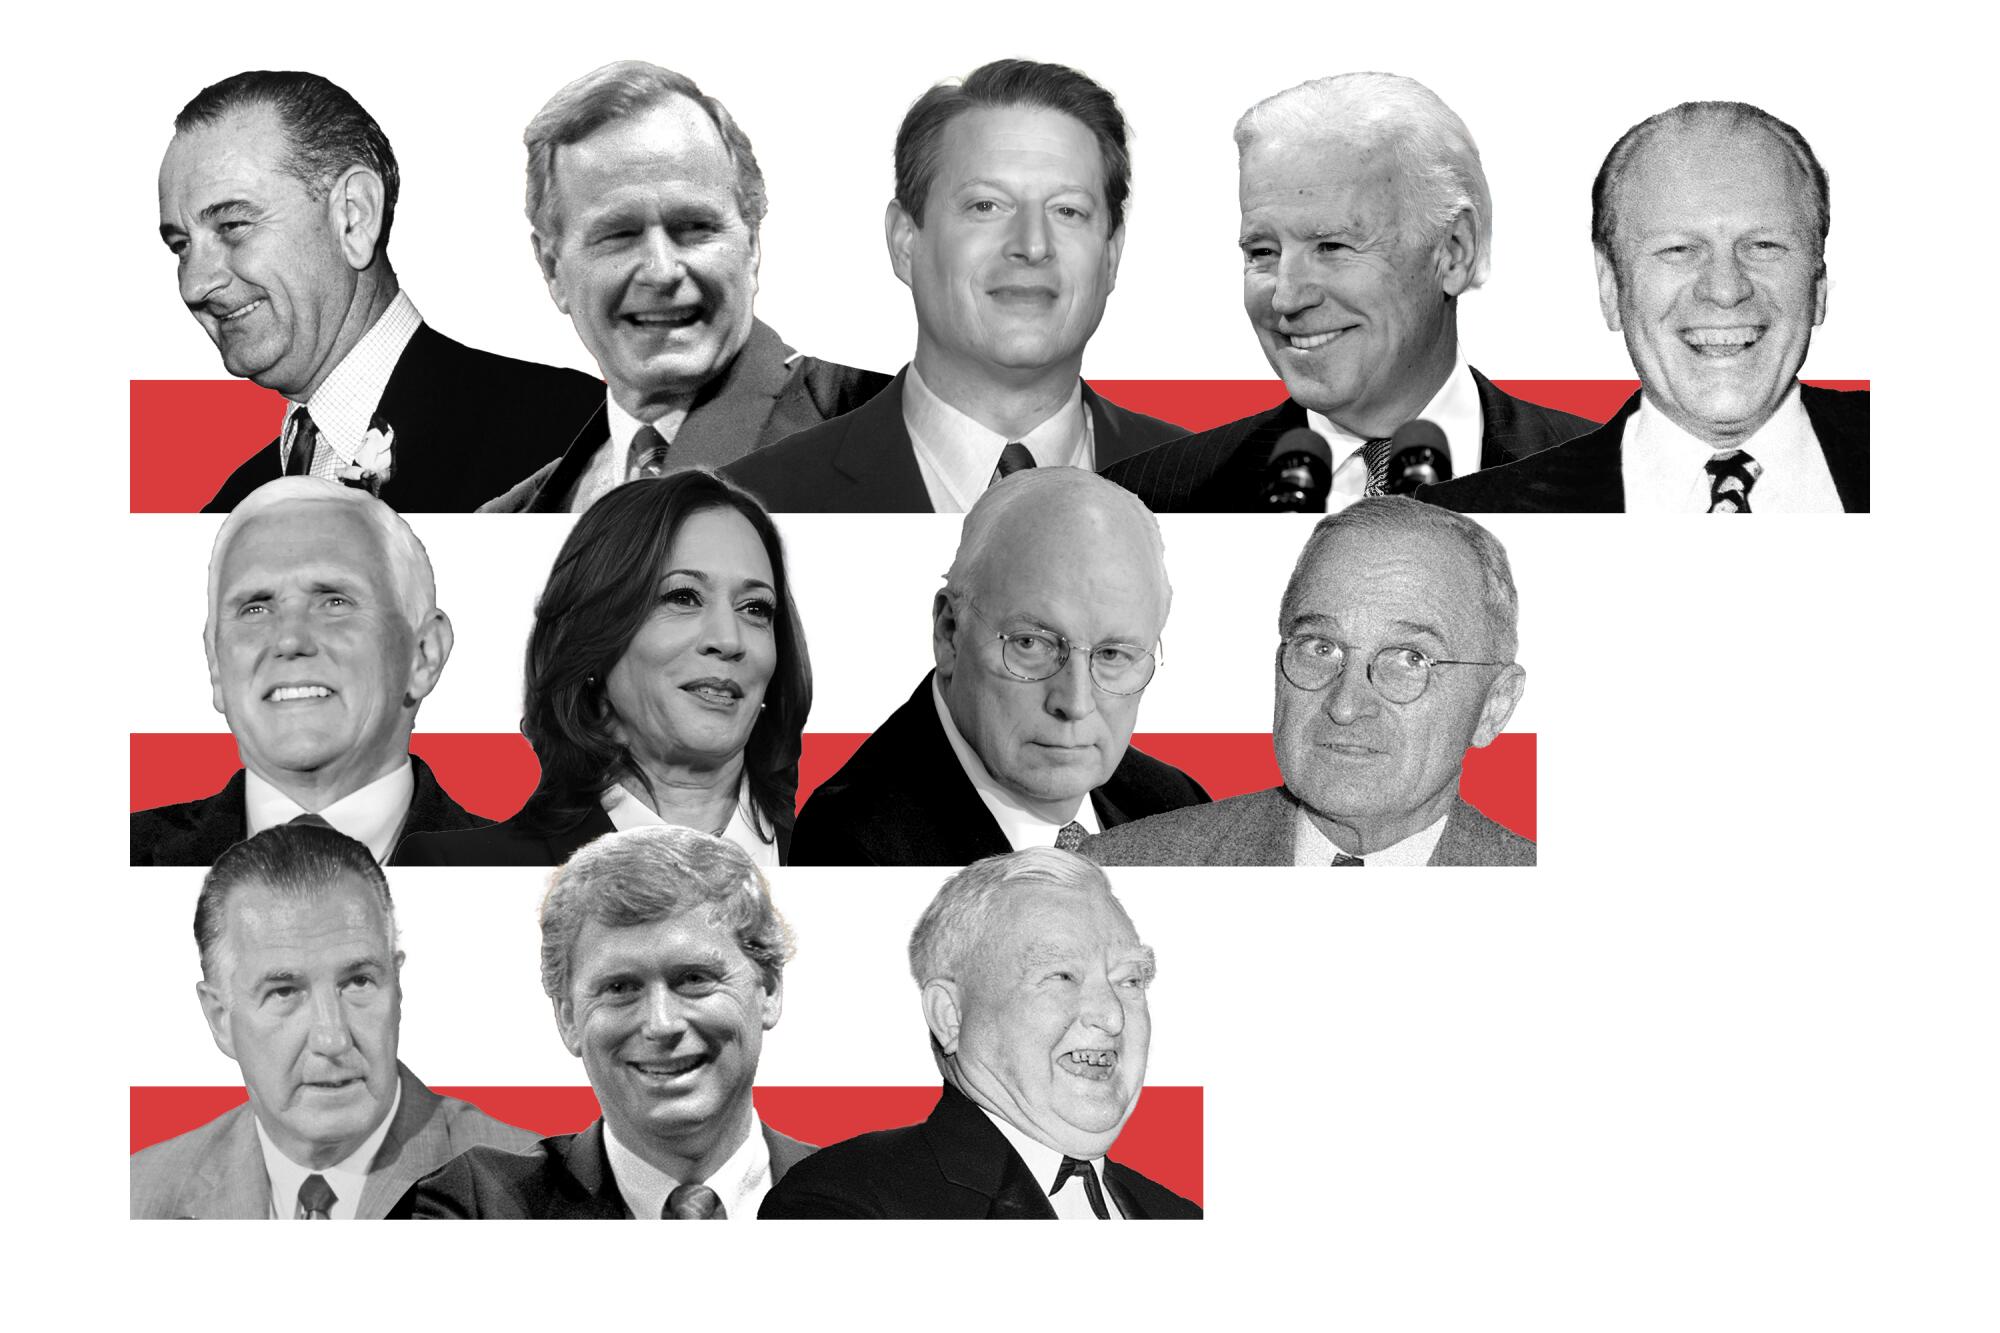 Horizontal red stripes of varying lengths featuring cutout heads of current and former vice presidents.